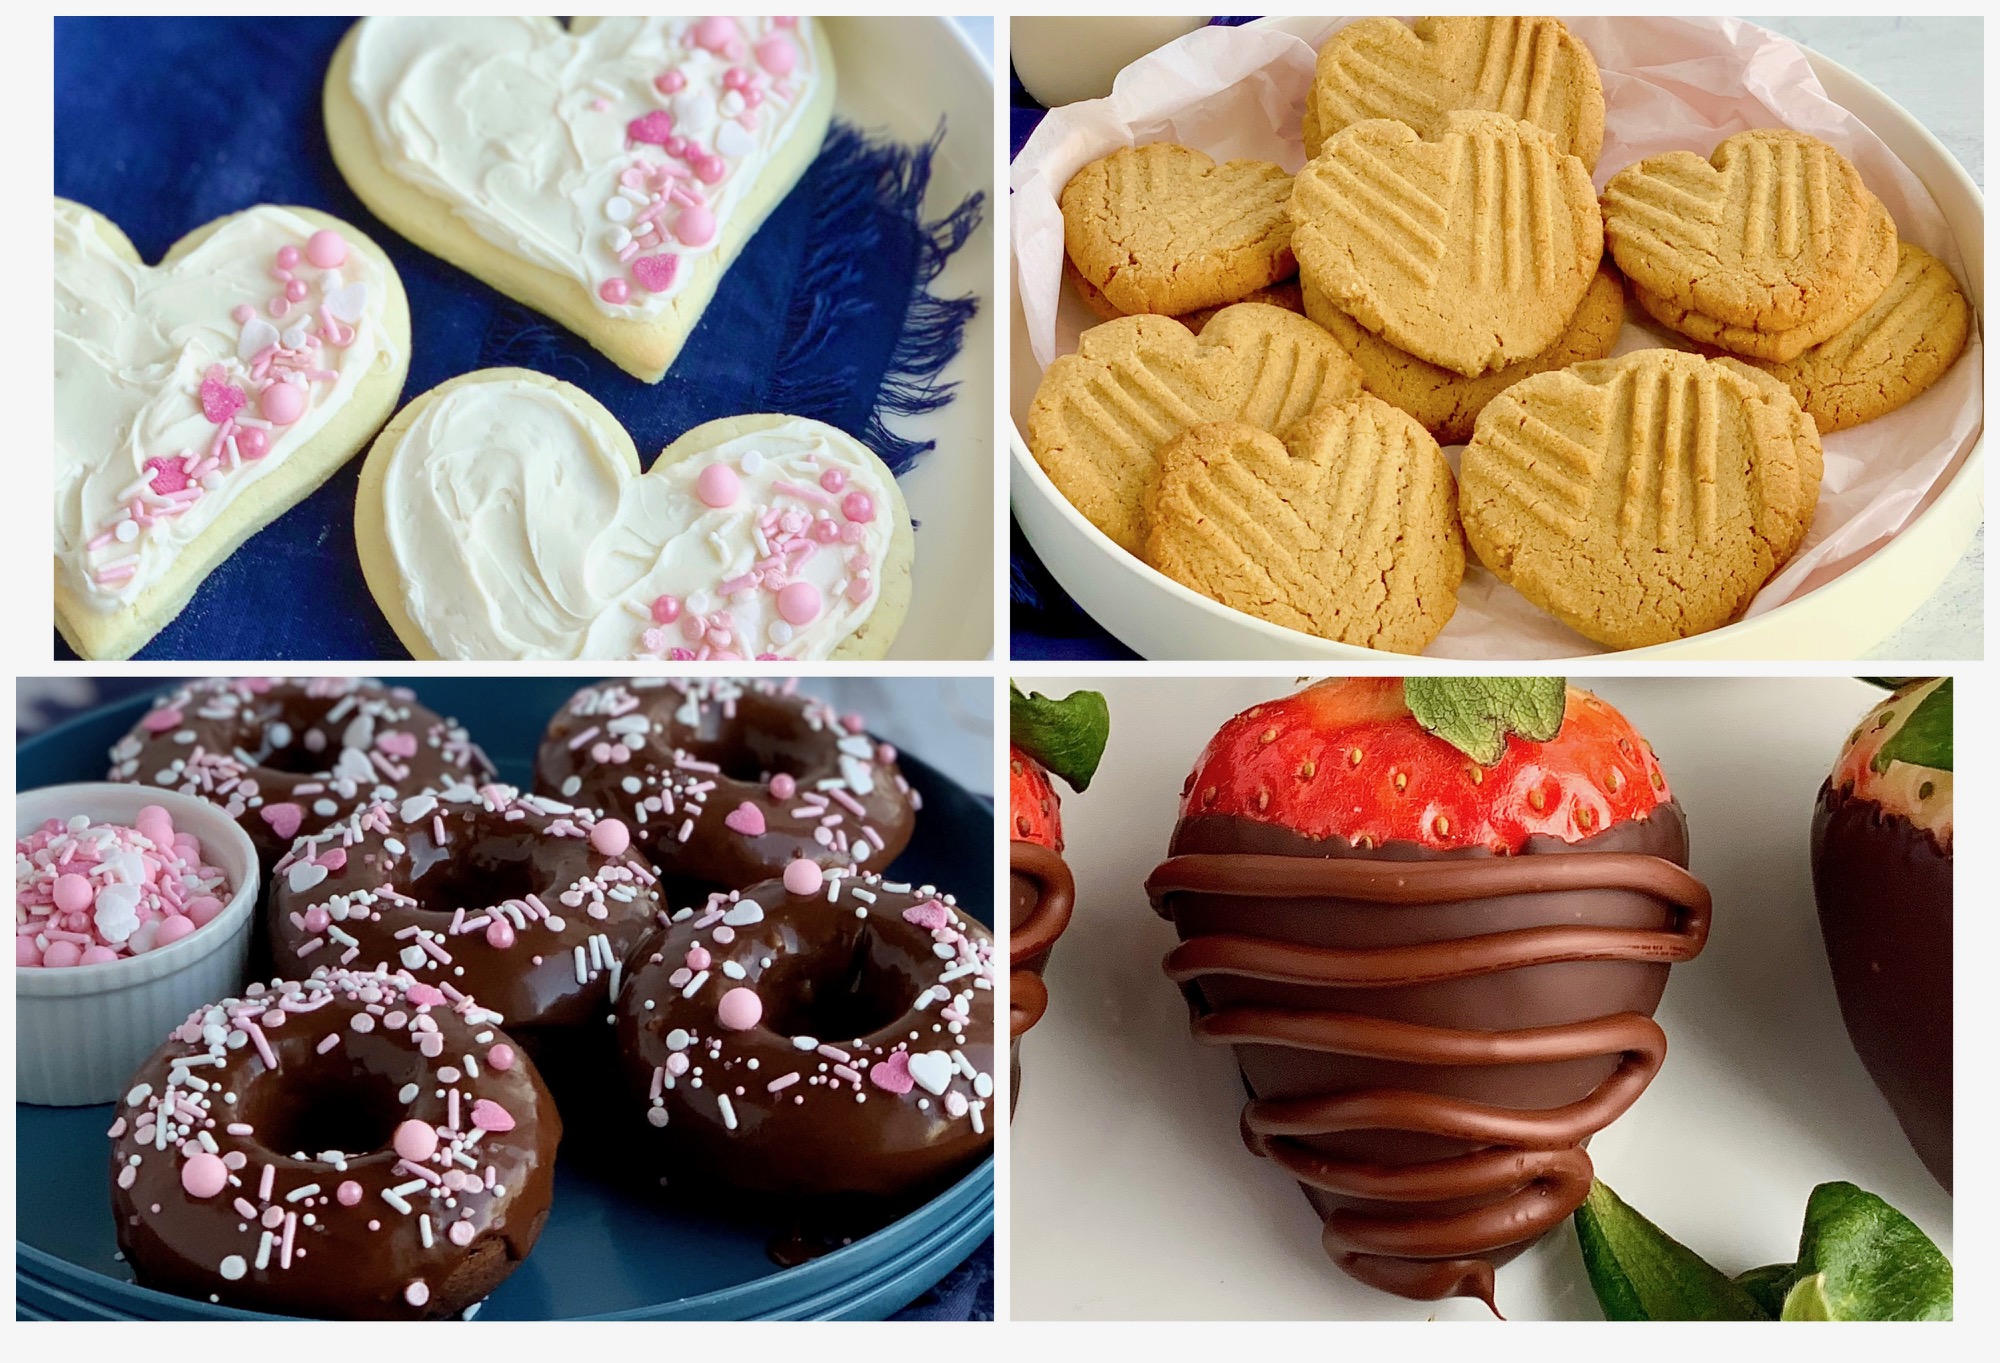 4 different Valentine's Day recipes including chocolate covered strawberries, double chocolate donuts with ganache frosting and white and pink sprinkles, a plateof heart shaped peanut butter cookies, and lastly a plate of heart shaped sugar cookies with with white frosting and pink and white sprinkles on them. a